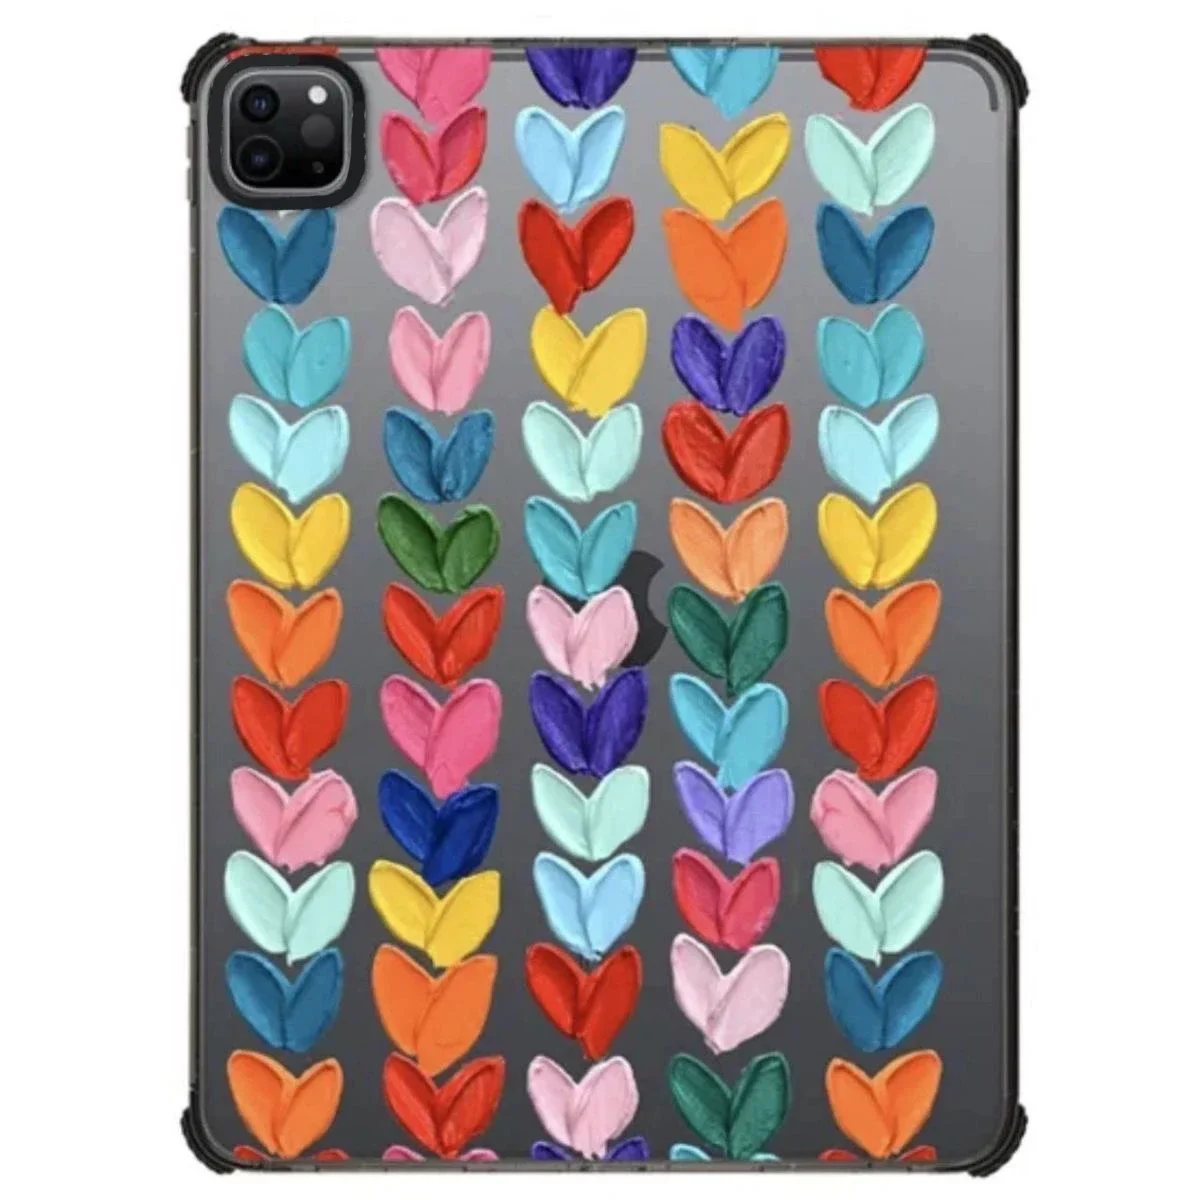 Colorful Heart Acrylic iPad Cover for iPad Air 4 5 (10.9inch) iPad Pro 2020 2021 2022 (11inch 12.9inch) Protective Case